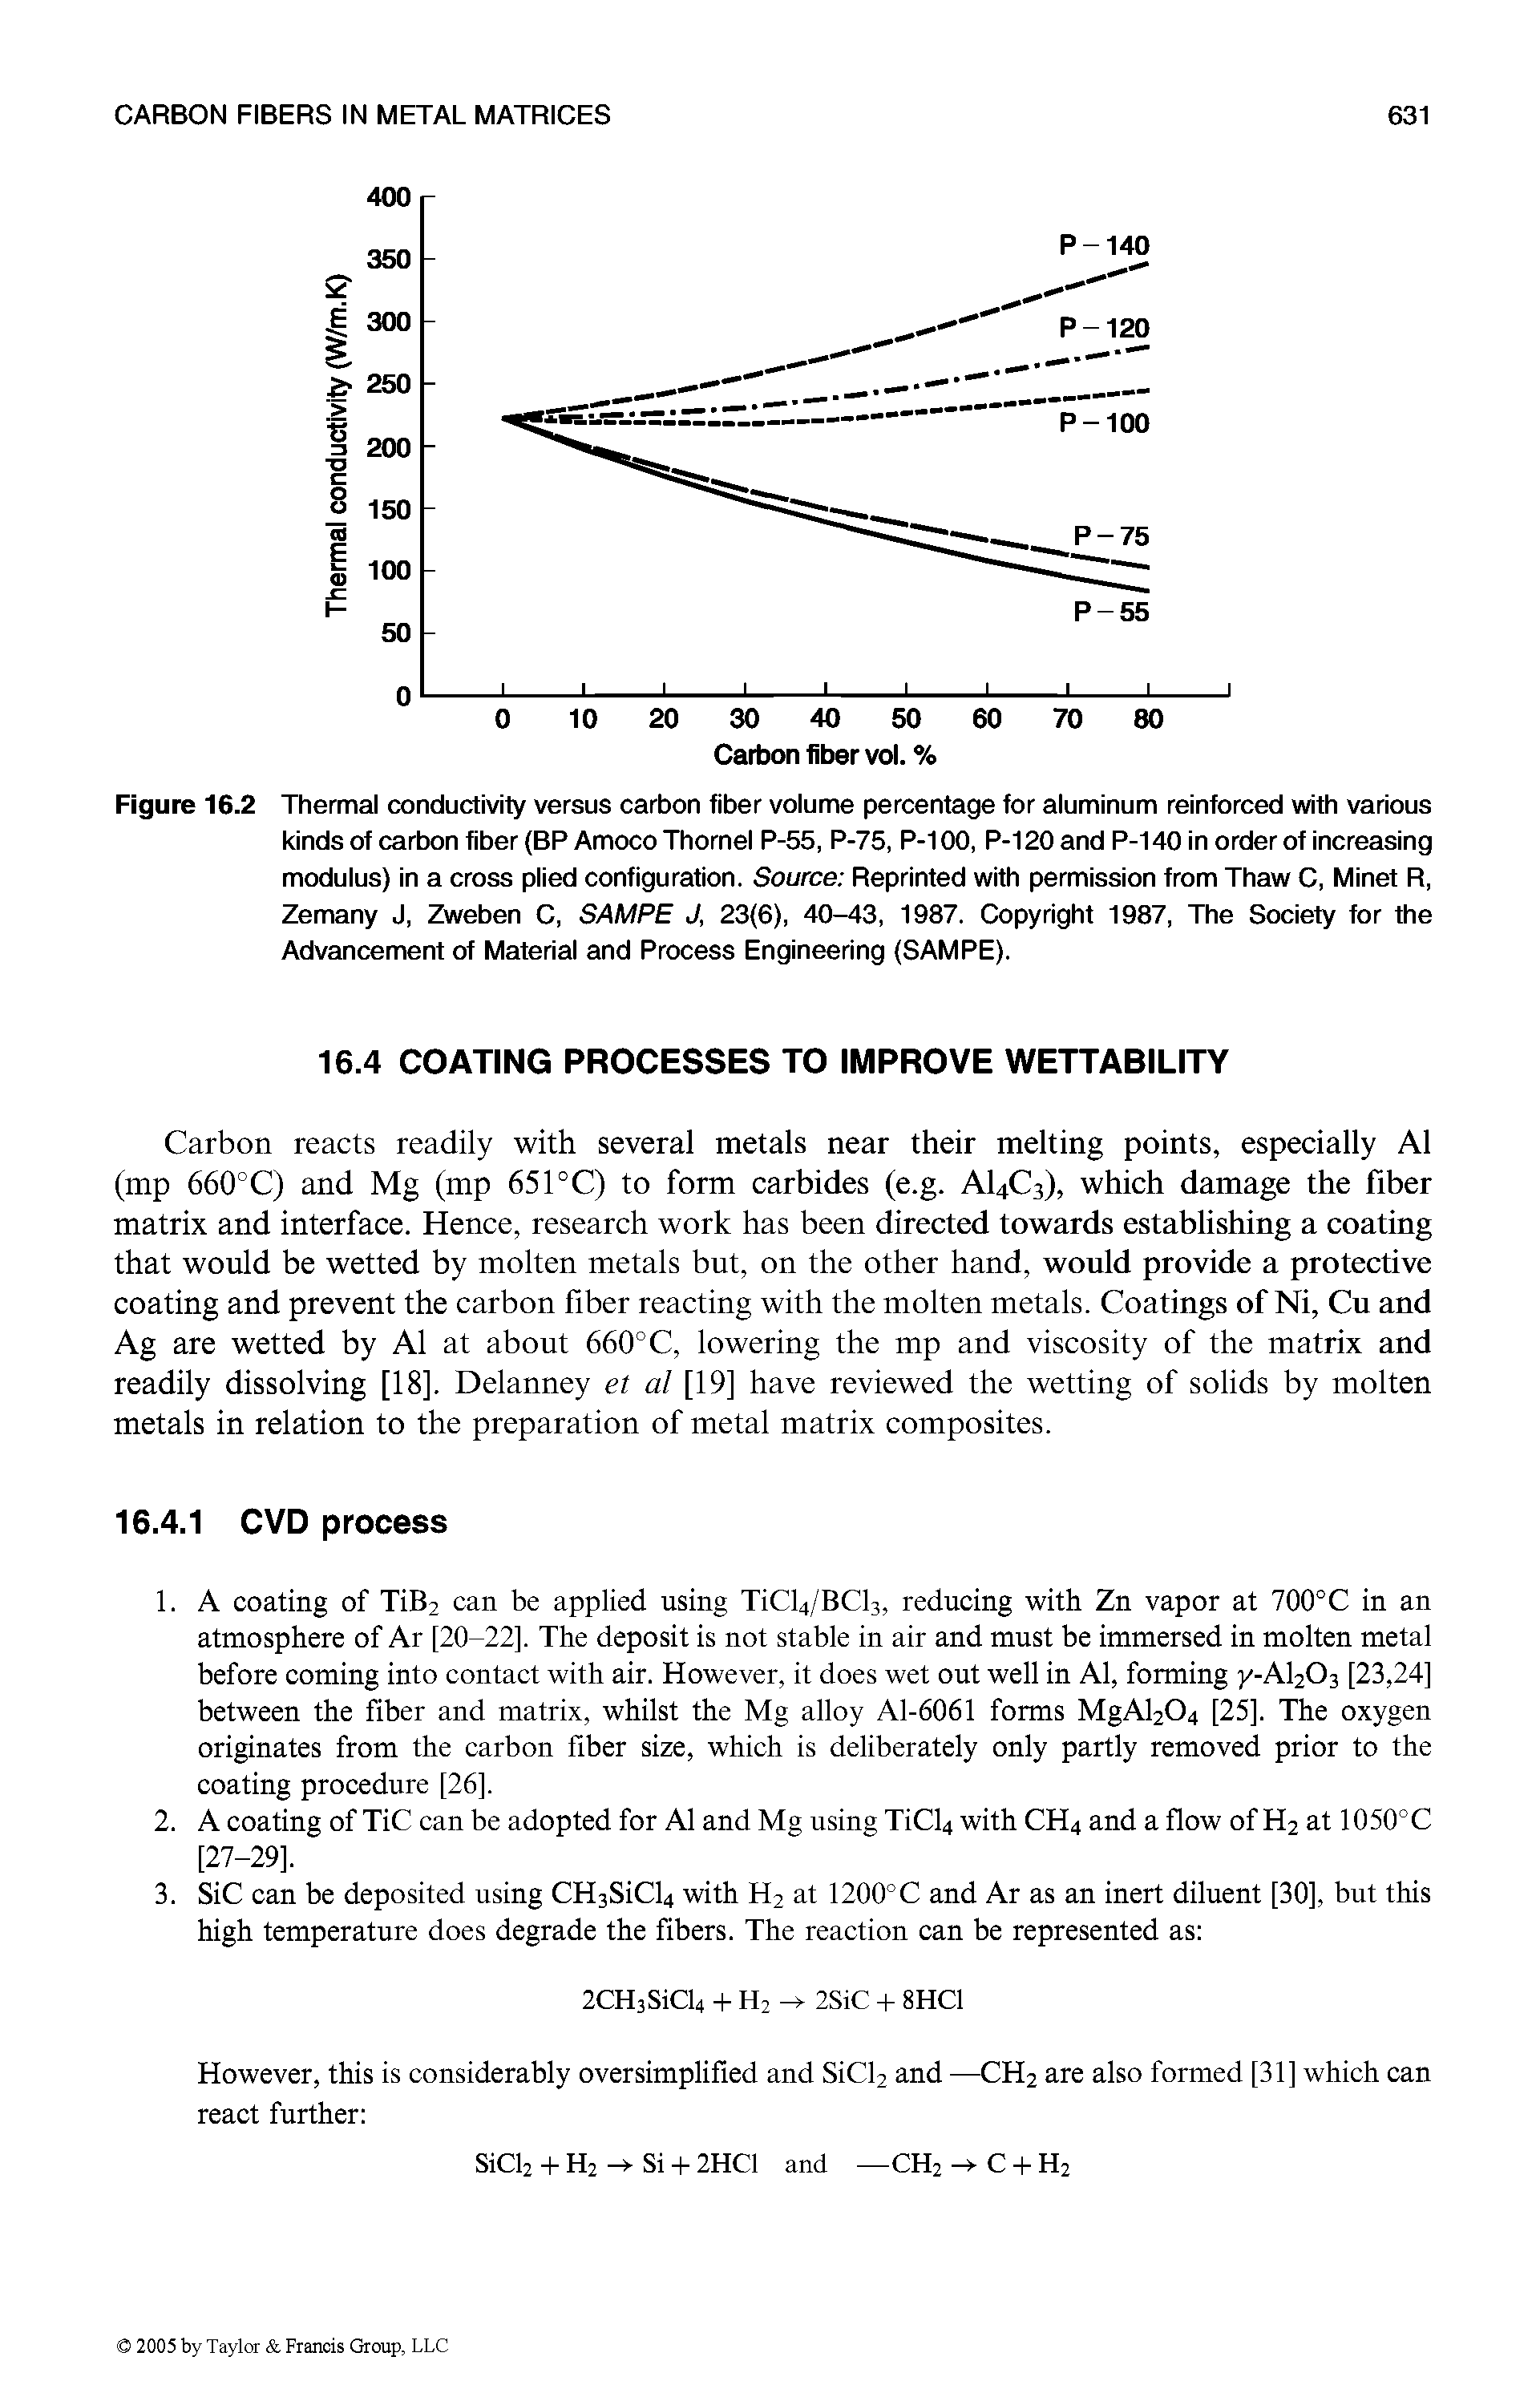 Figure 16.2 Thermal conductivity versus carbon fiber volume percentage for aluminum reinforced with various kinds of carbon fiber (BP Amoco Thomel P-55, P-75, P-100, P-120 and P-140 in order of increasing modulus) in a cross plied configuration. Source Reprinted with permission from Thaw C, Minet R, Zemany J, Zweben C, SAMPE J, 23(6), 40-43, 1987. Copyright 1987, The Society for the Advancement of Material and Process Engineering (SAMPE).